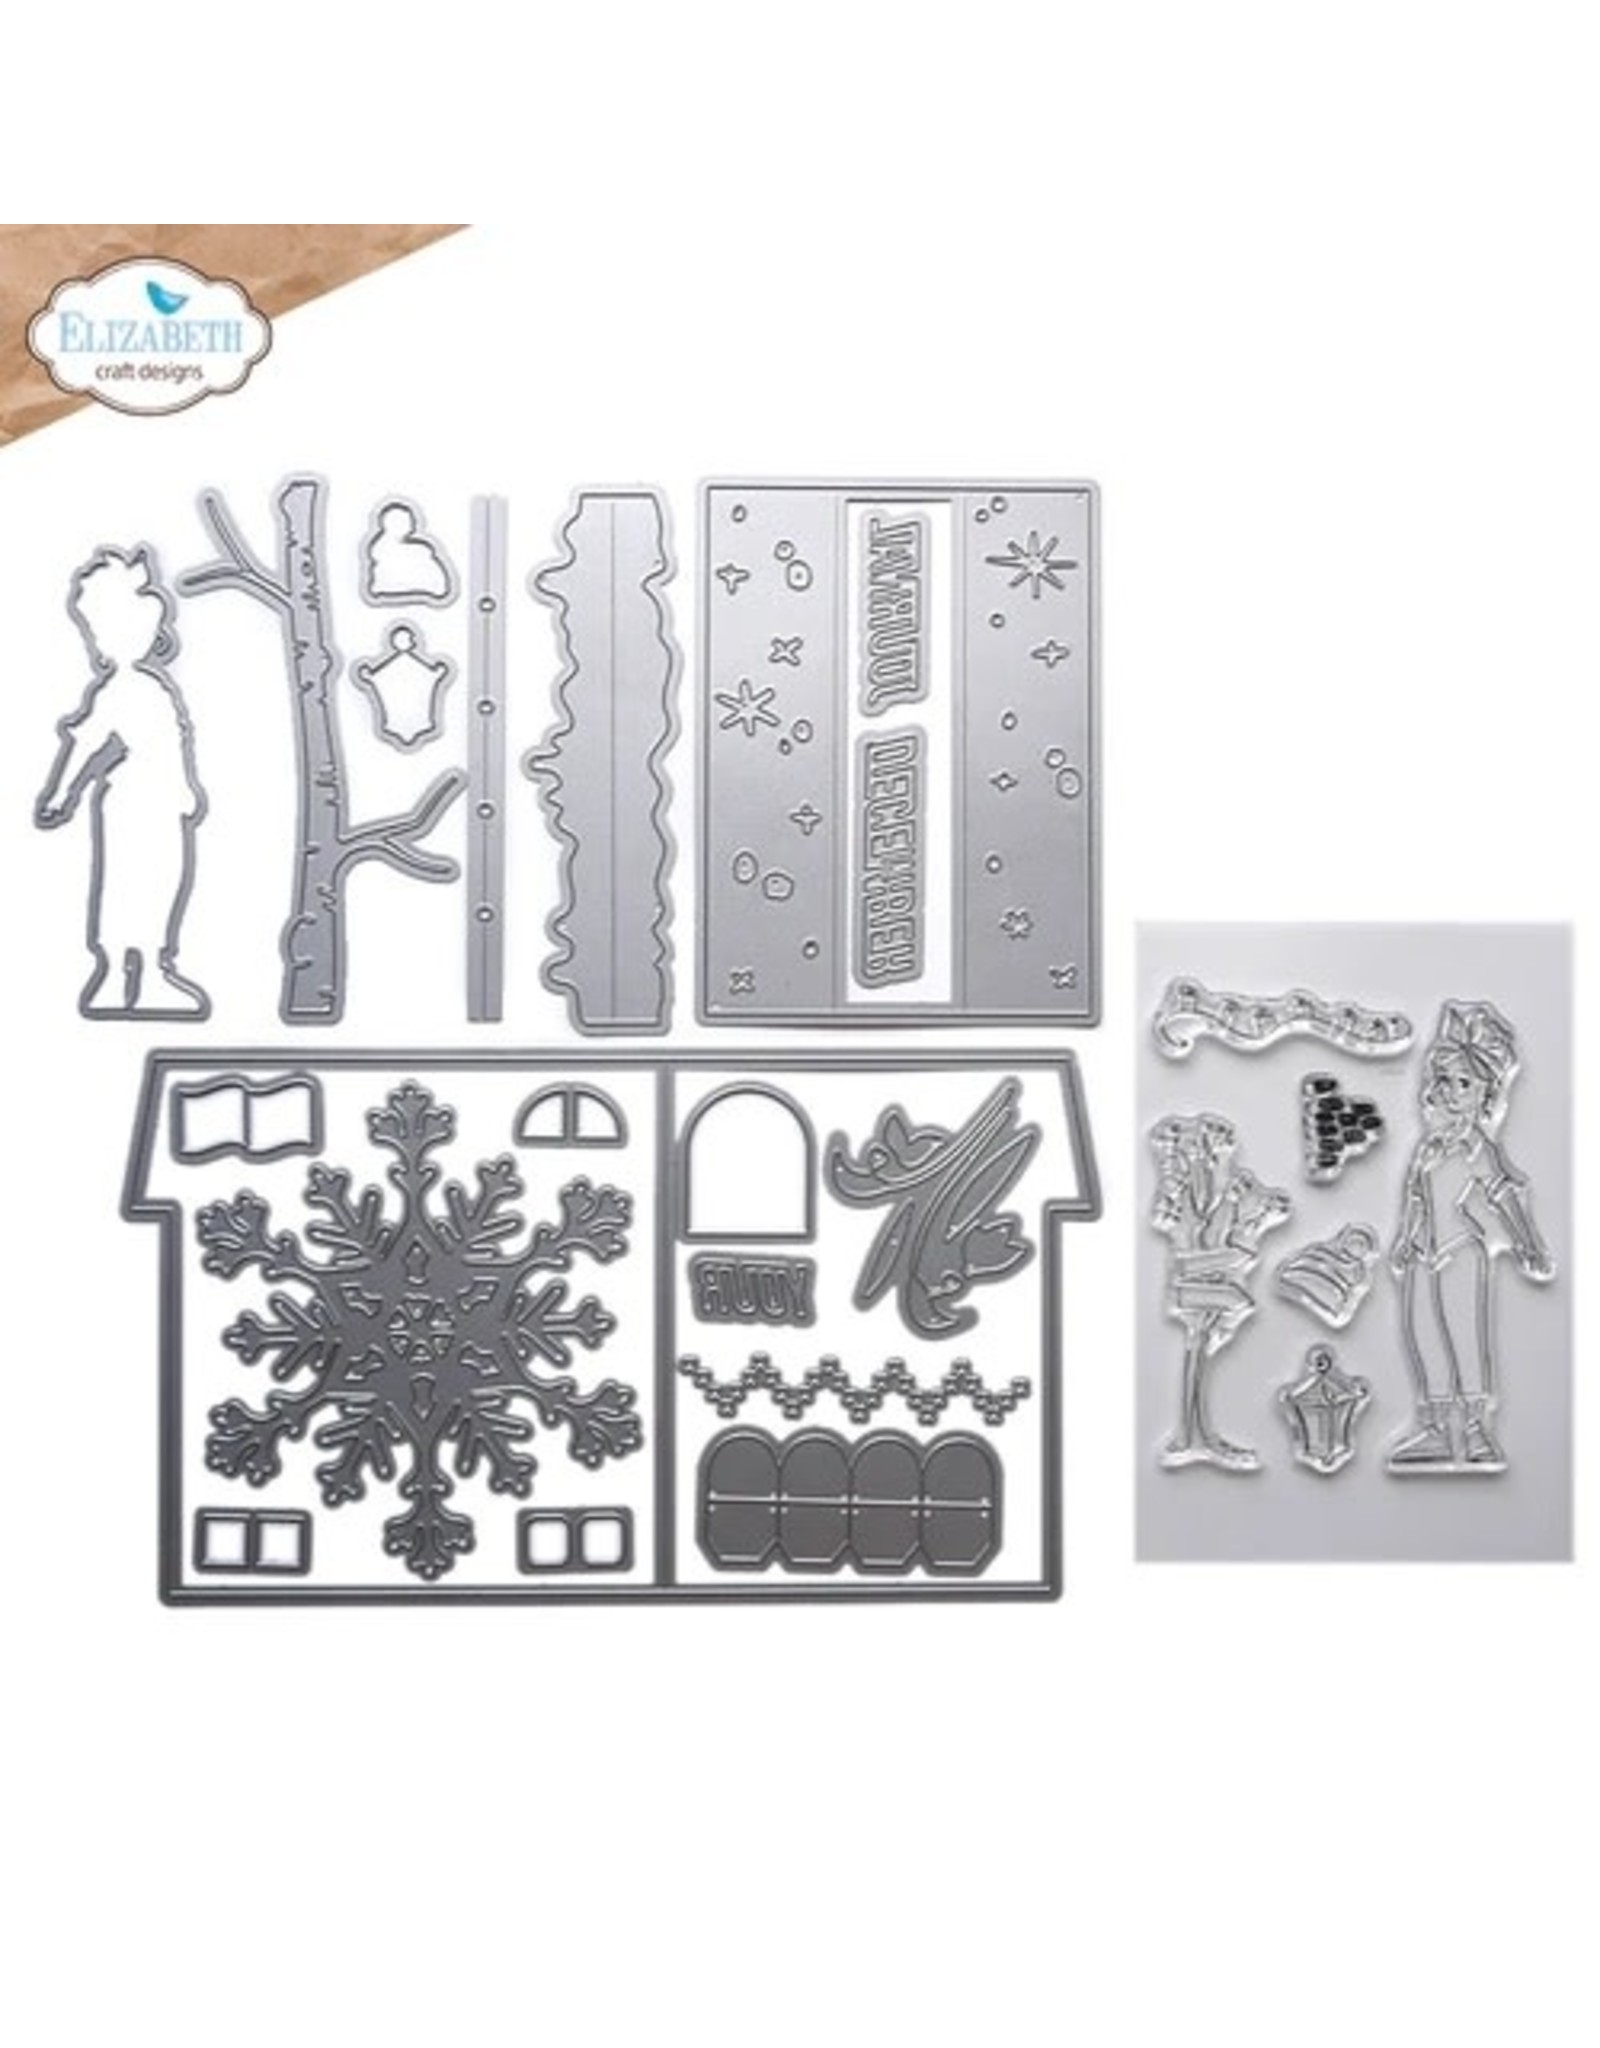 ELIZABETH CRAFT DESIGNS ELIZABETH CRAFT DESIGNS HOLIDAY SPECIAL KIT